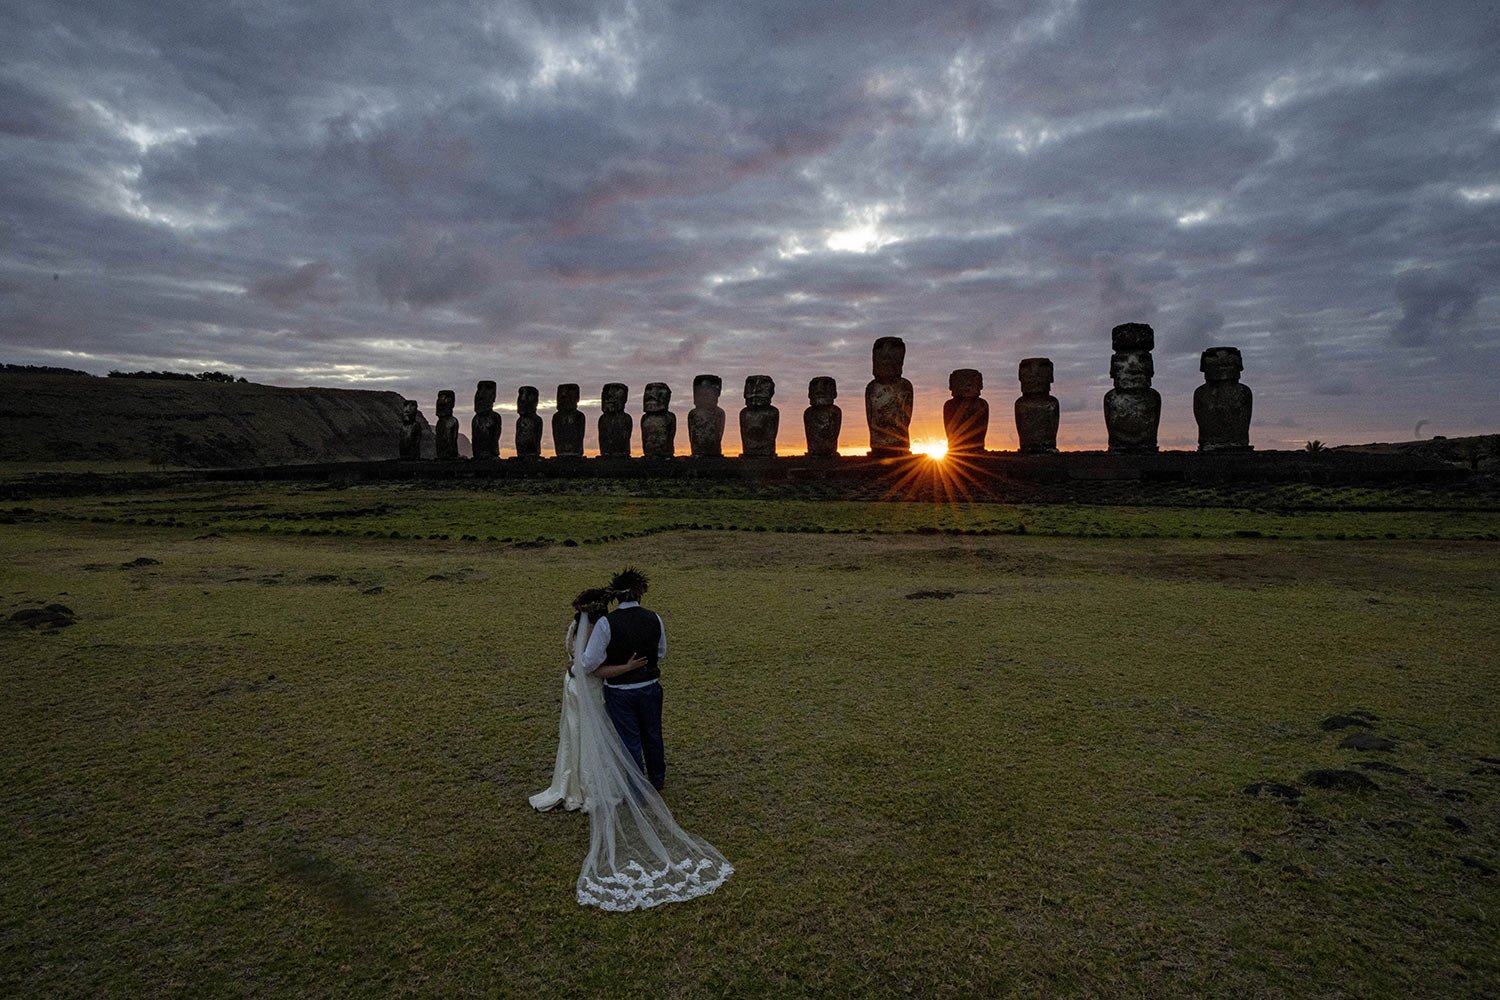  Chilean newlyweds Daniela Figueroa and Ricardo Torres, from Puerto Montt, Chile, look at moai statues at sunrise as they get cell phone photos taken by their tour guide on Ahu Tongariki, Rapa Nui, or Easter Island, Chile, Tuesday, Nov. 22, 2022. (AP